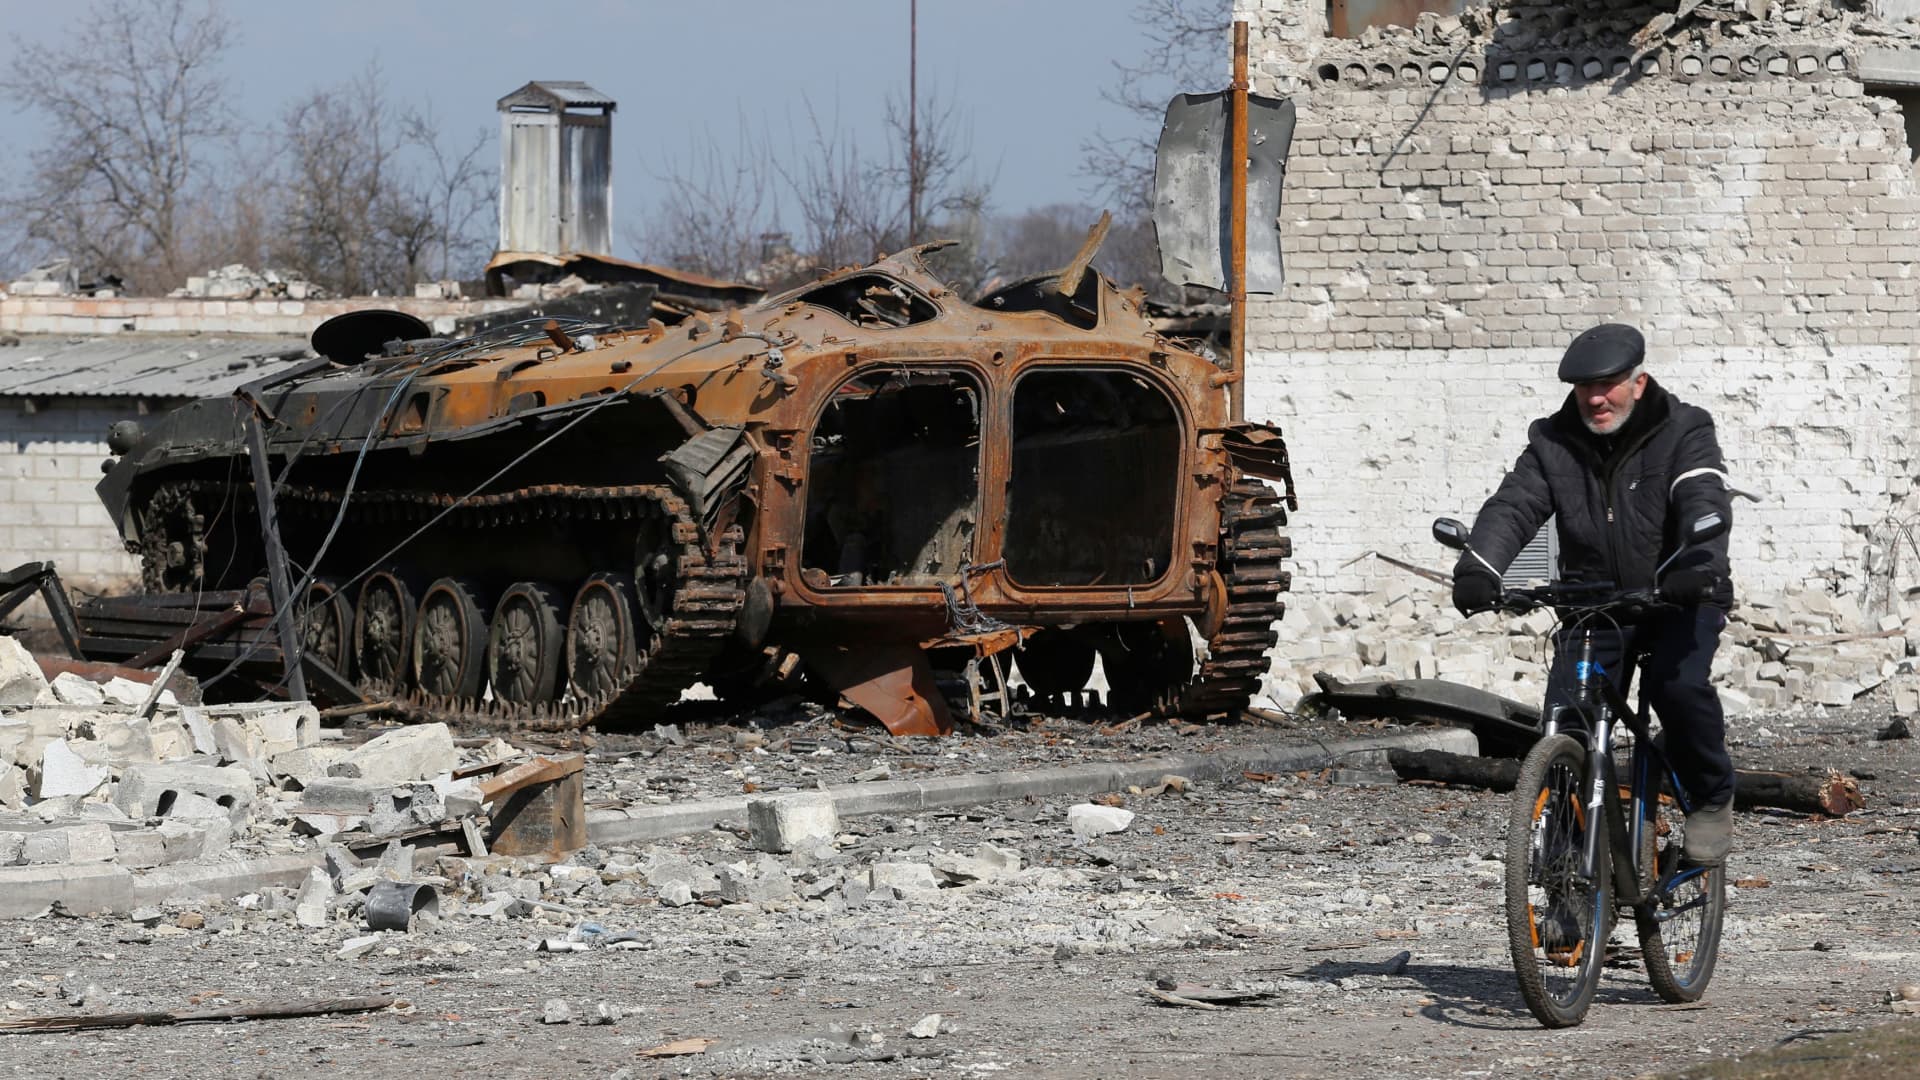 A local resident rides a bicycle past a charred armoured vehicle during Ukraine-Russia conflict in the separatist-controlled town of Volnovakha in the Donetsk region, Ukraine March 15, 2022.